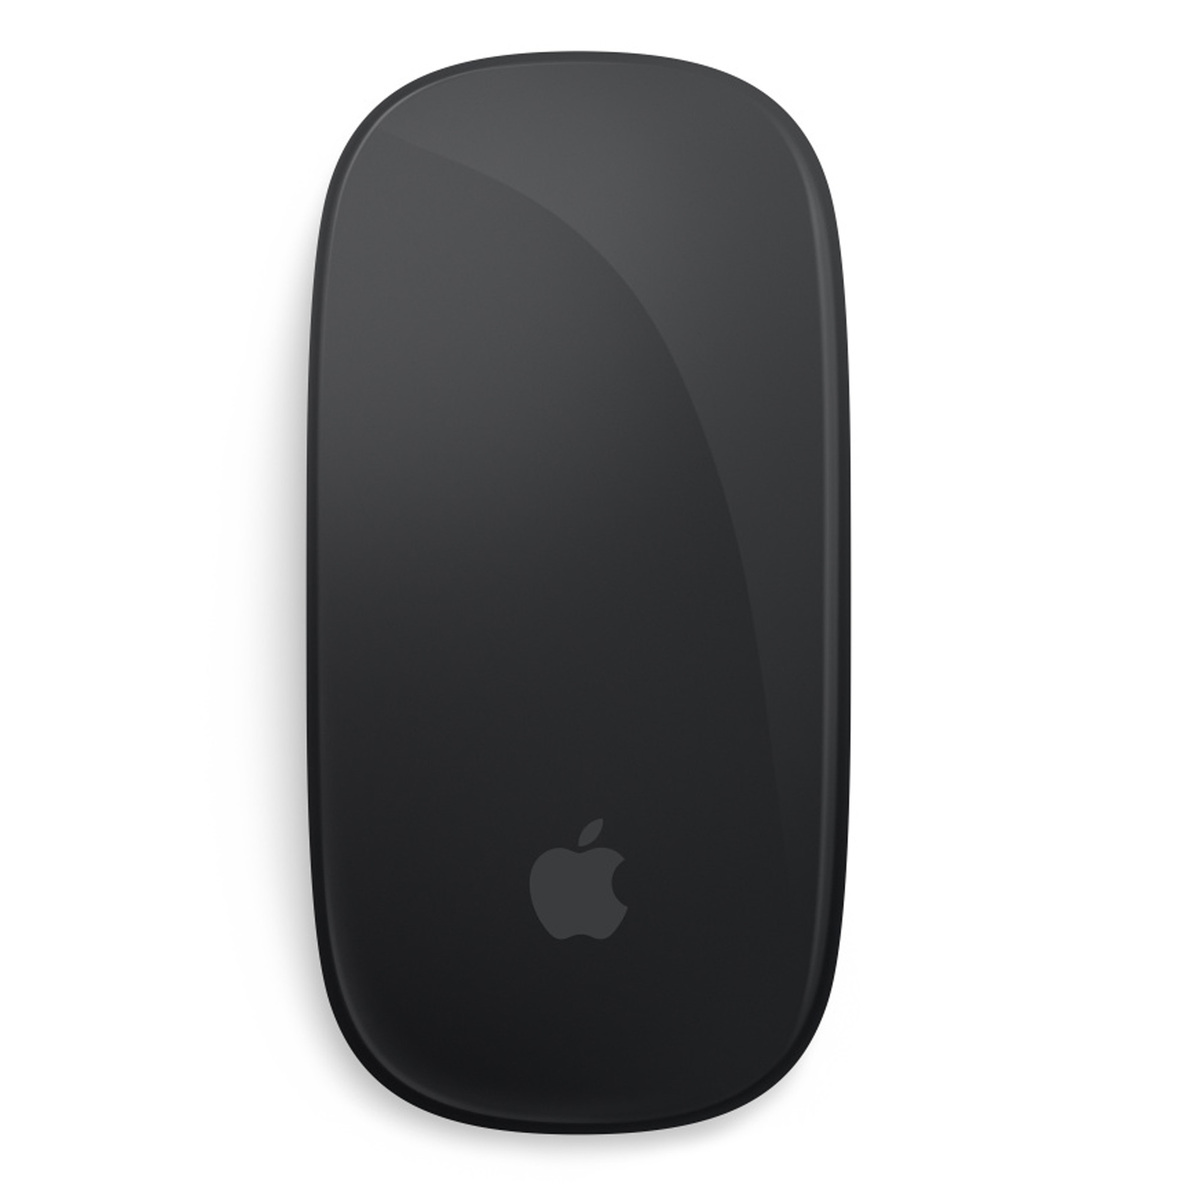 Magic Mouse - Black Multi-Touch Surface MMMQ3ZE/A